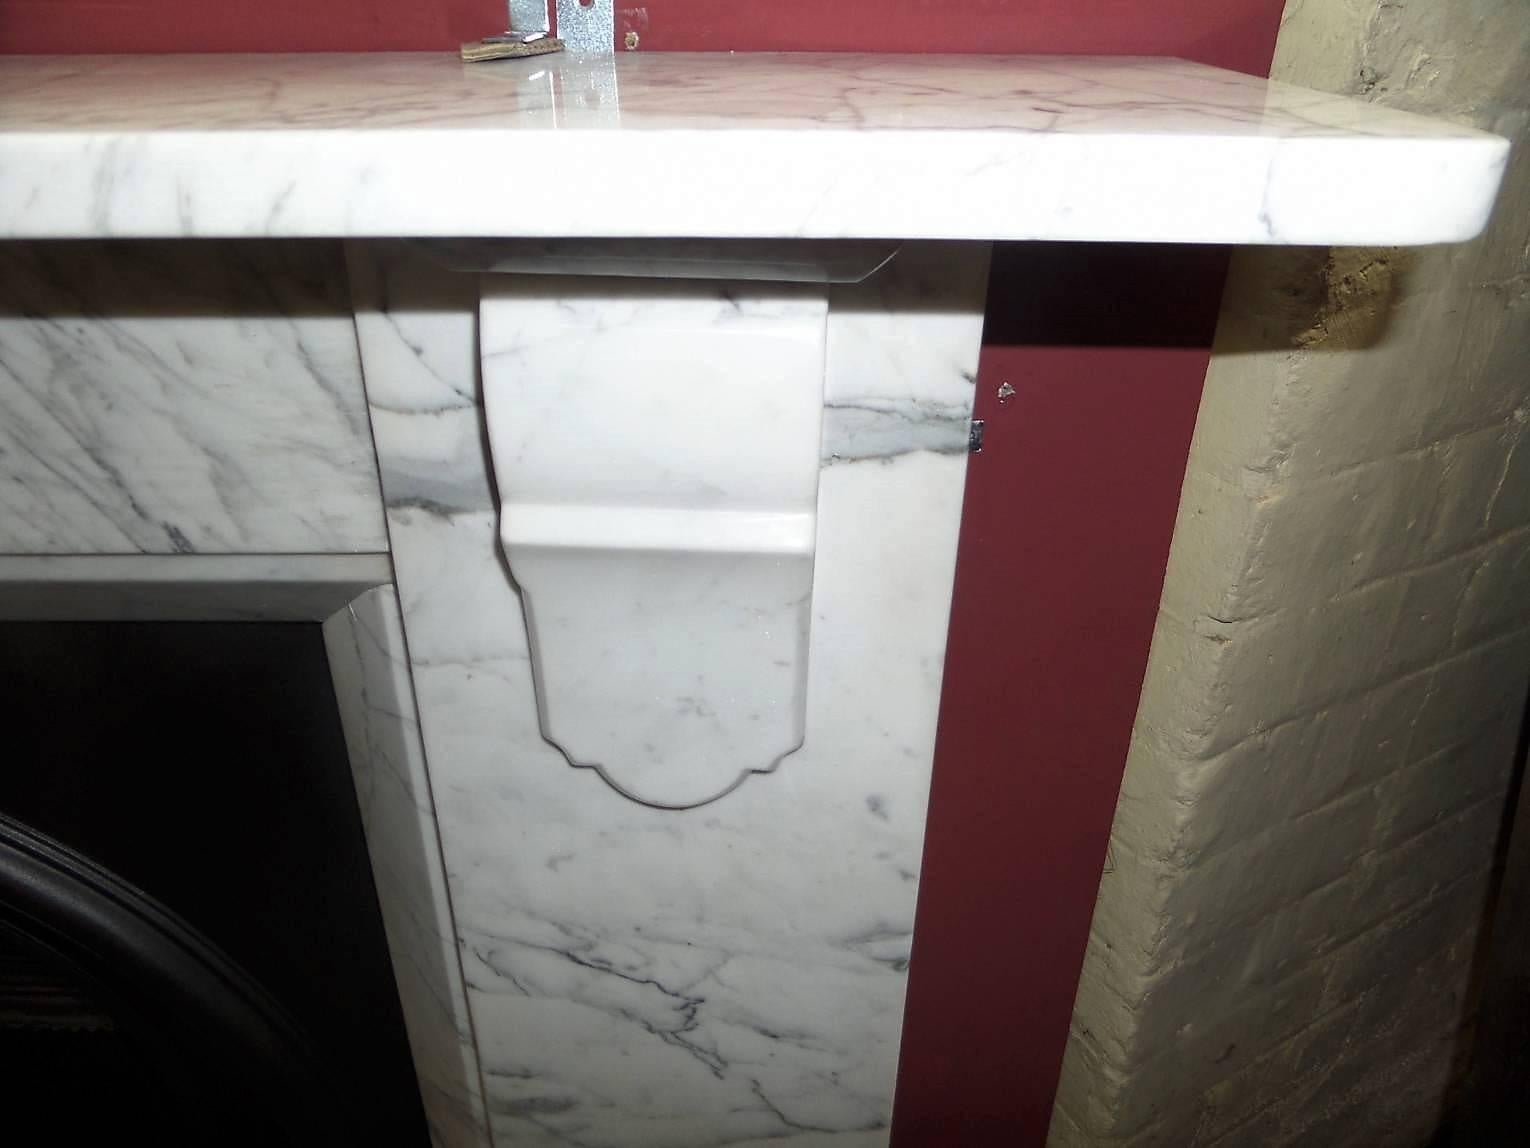 Great Britain (UK) Early 20th Century Edwardian Carrara Marble Chimney Piece Surround For Sale